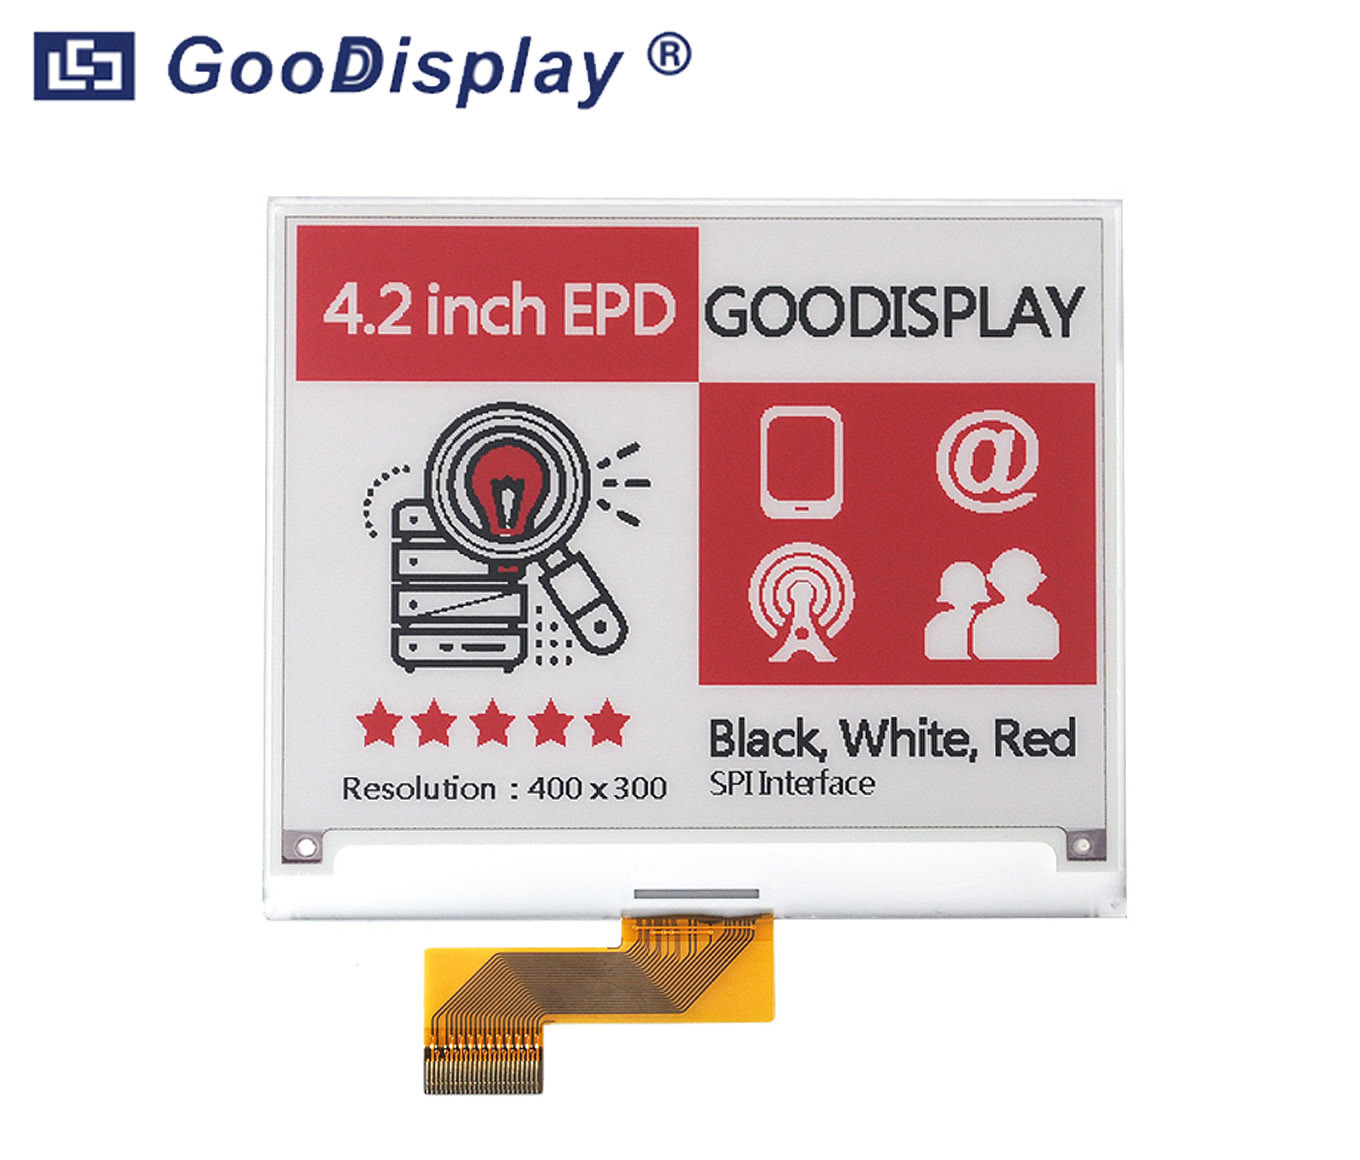 4.2 inch color e-ink epd display for electronic price tag, GDEY042Z98